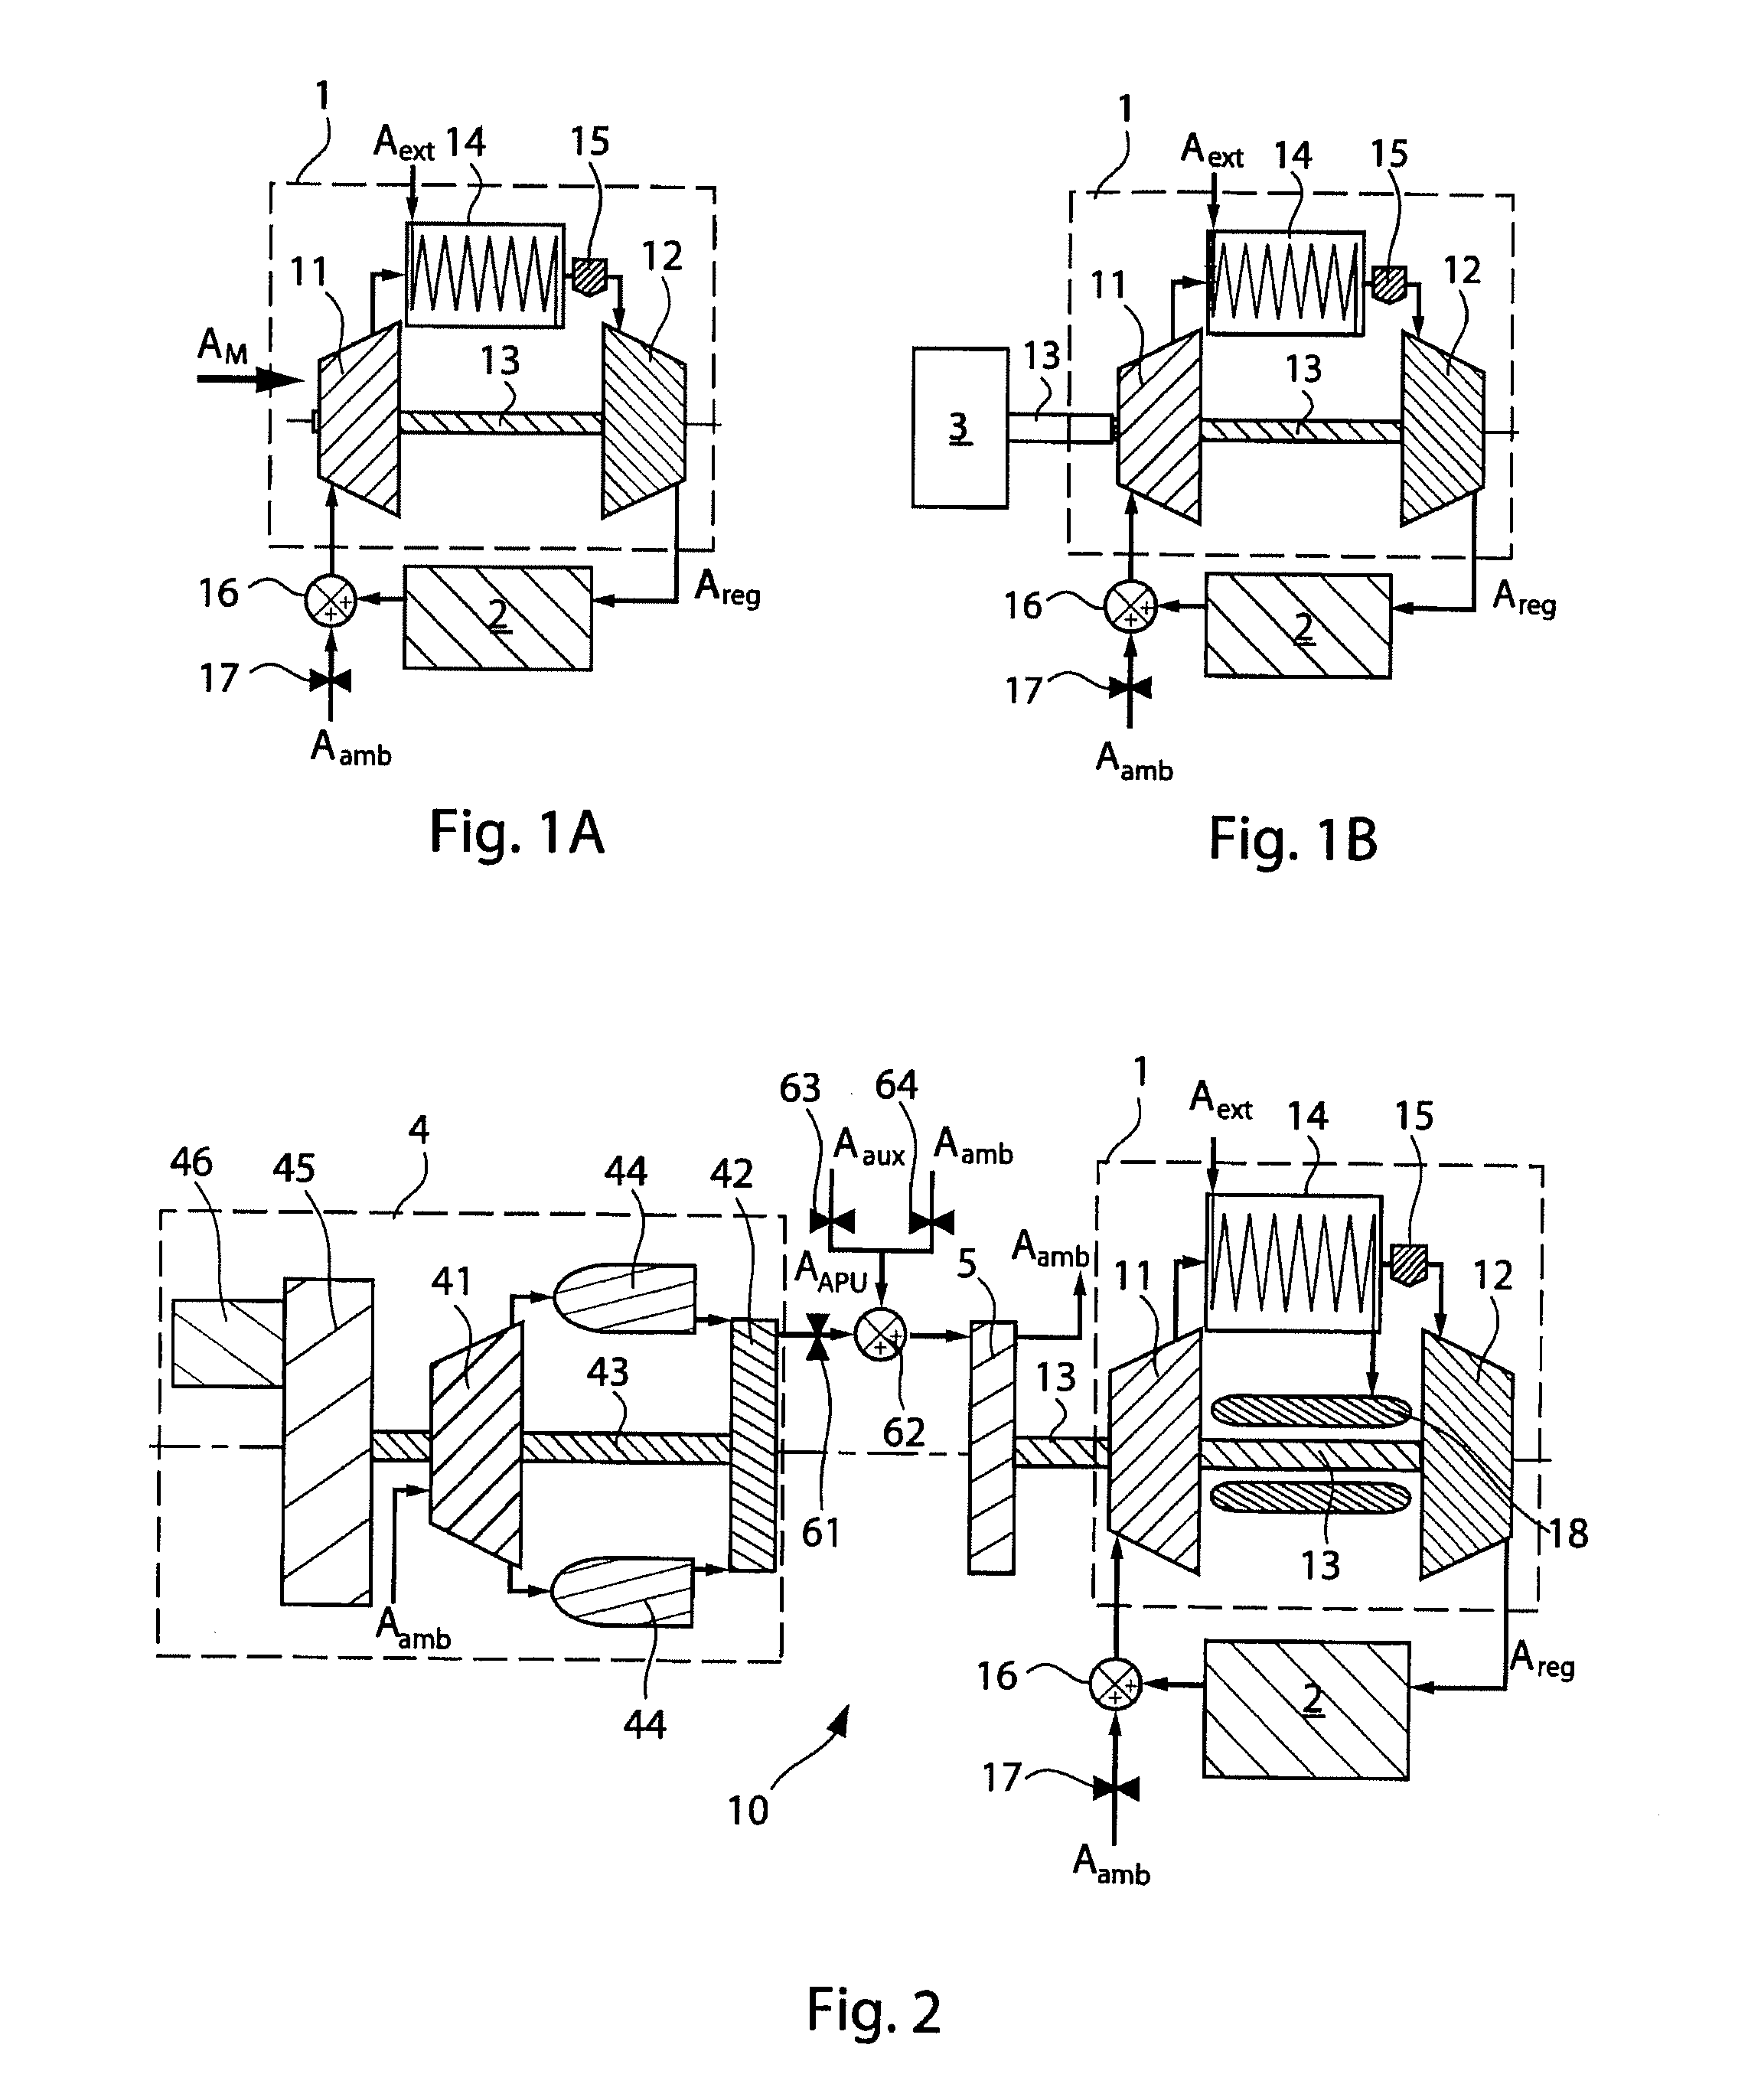 Device and method for supplying non-propulsive power for an aircraft